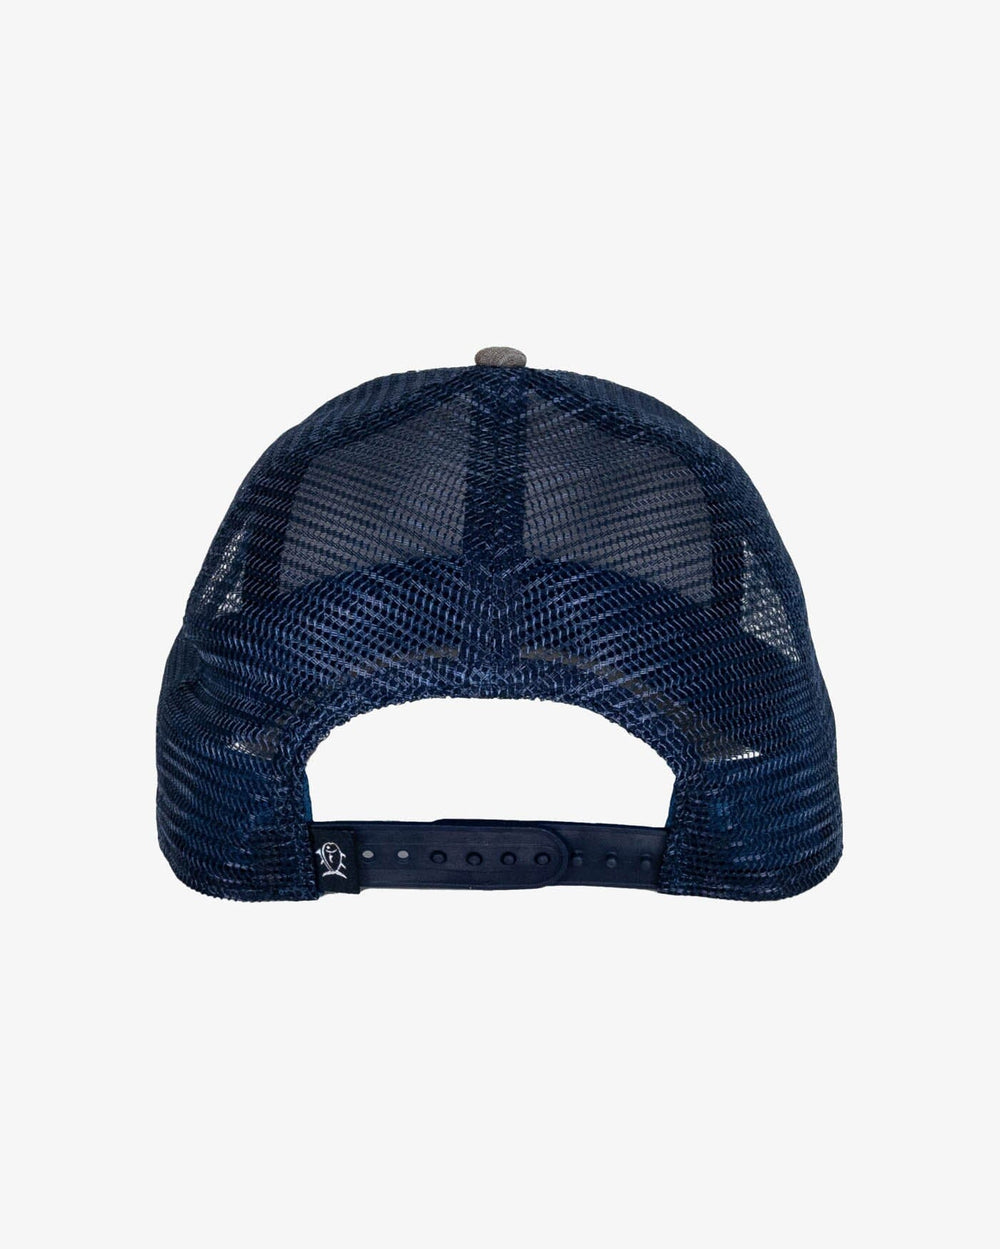 The back view of the Southern Tide Southern Tide Deer Hexagon Trucker by Southern Tide - Grey